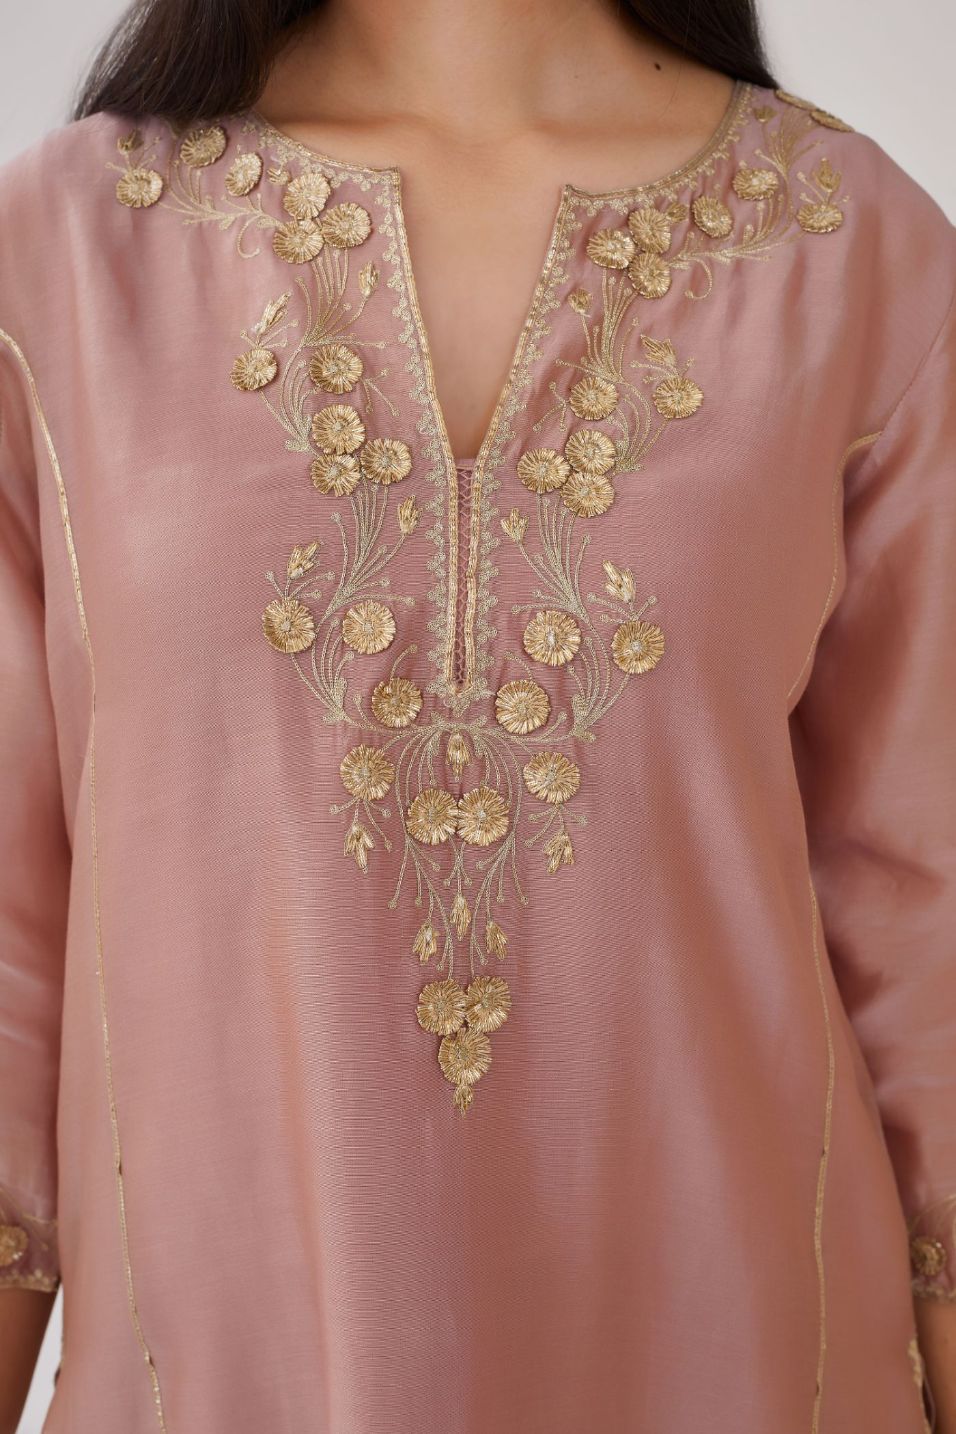 Lilac silk chanderi kurta with gota embroidered neckline and hem, paired with lilac straight pants with gota and silk chanderi fabric detaling at bottom hem